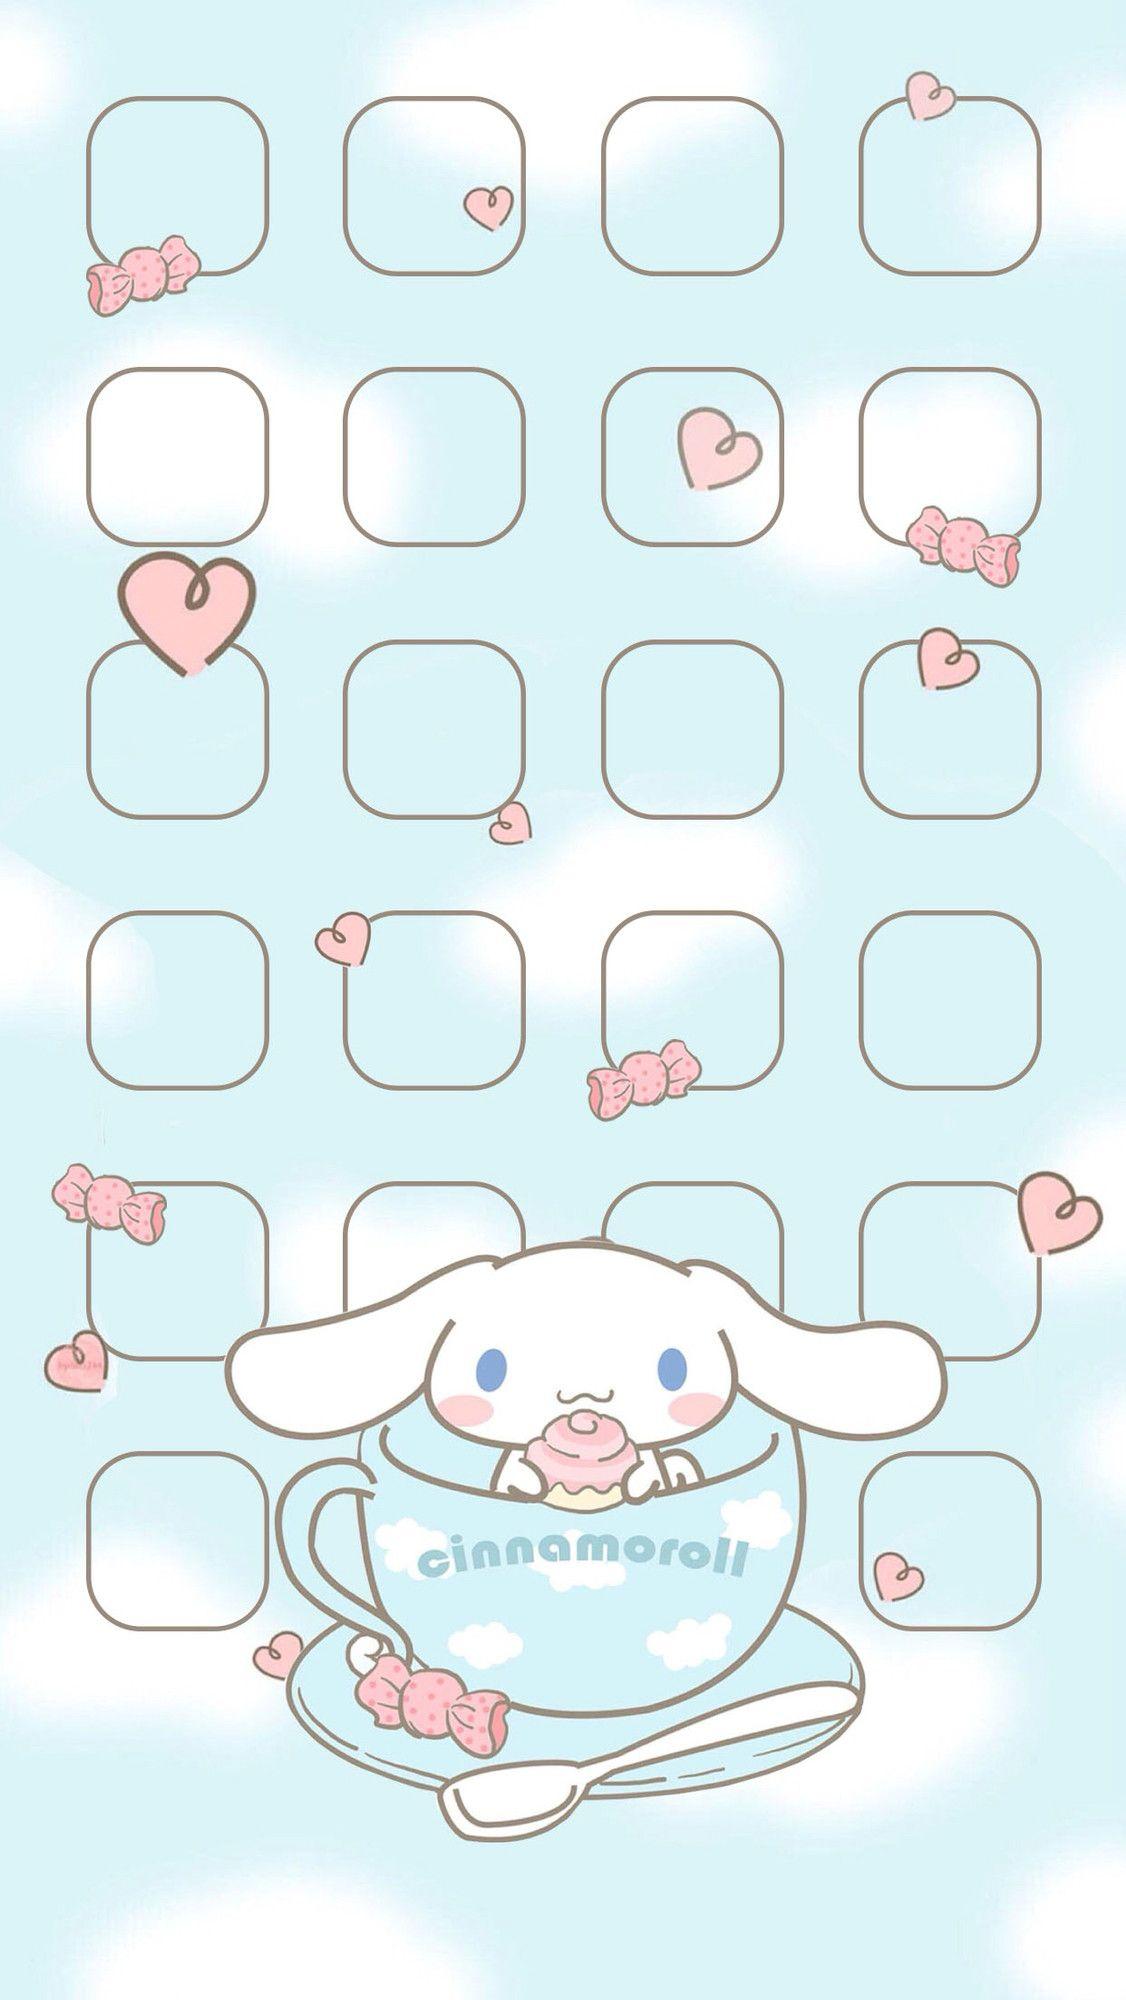 Cinnamoroll Wallpaper  Valencias Kofi Shop  Kofi  Where creators get  support from fans through donations memberships shop sales and more The  original Buy Me a Coffee Page